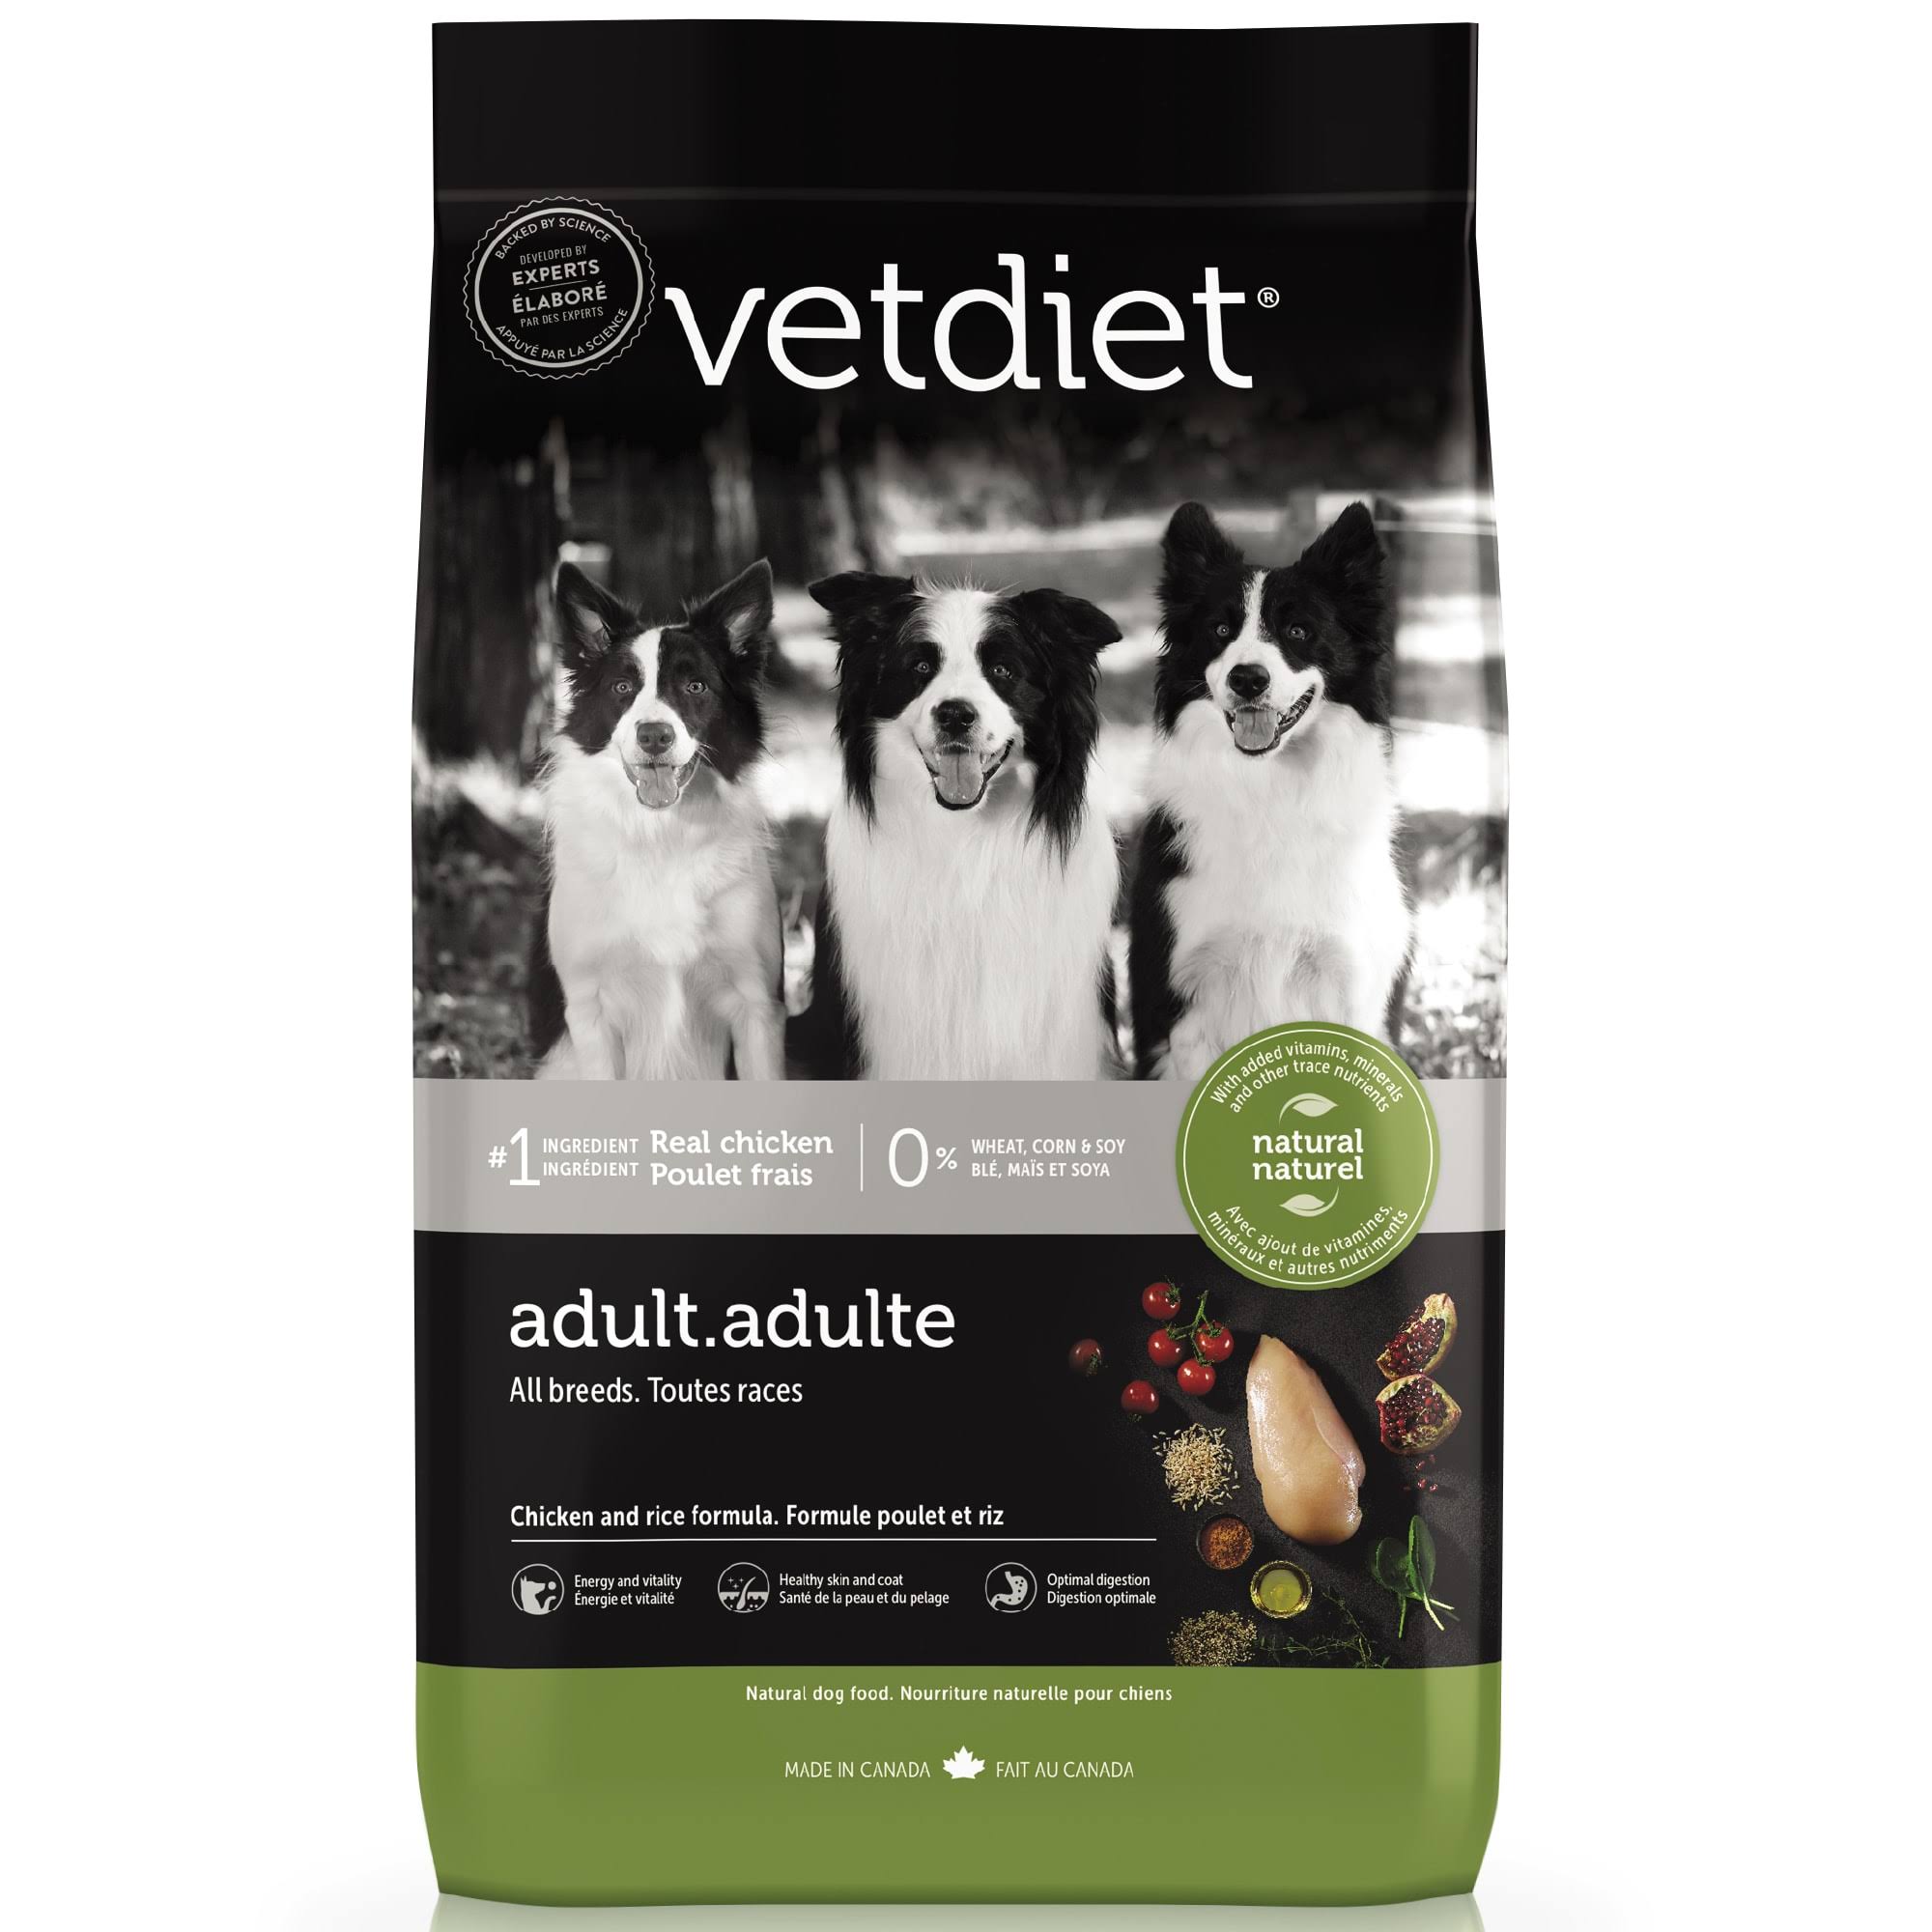 Vetdiet Chicken & Rice Formula Adult All Breeds Dry Dog Food, 30 lbs